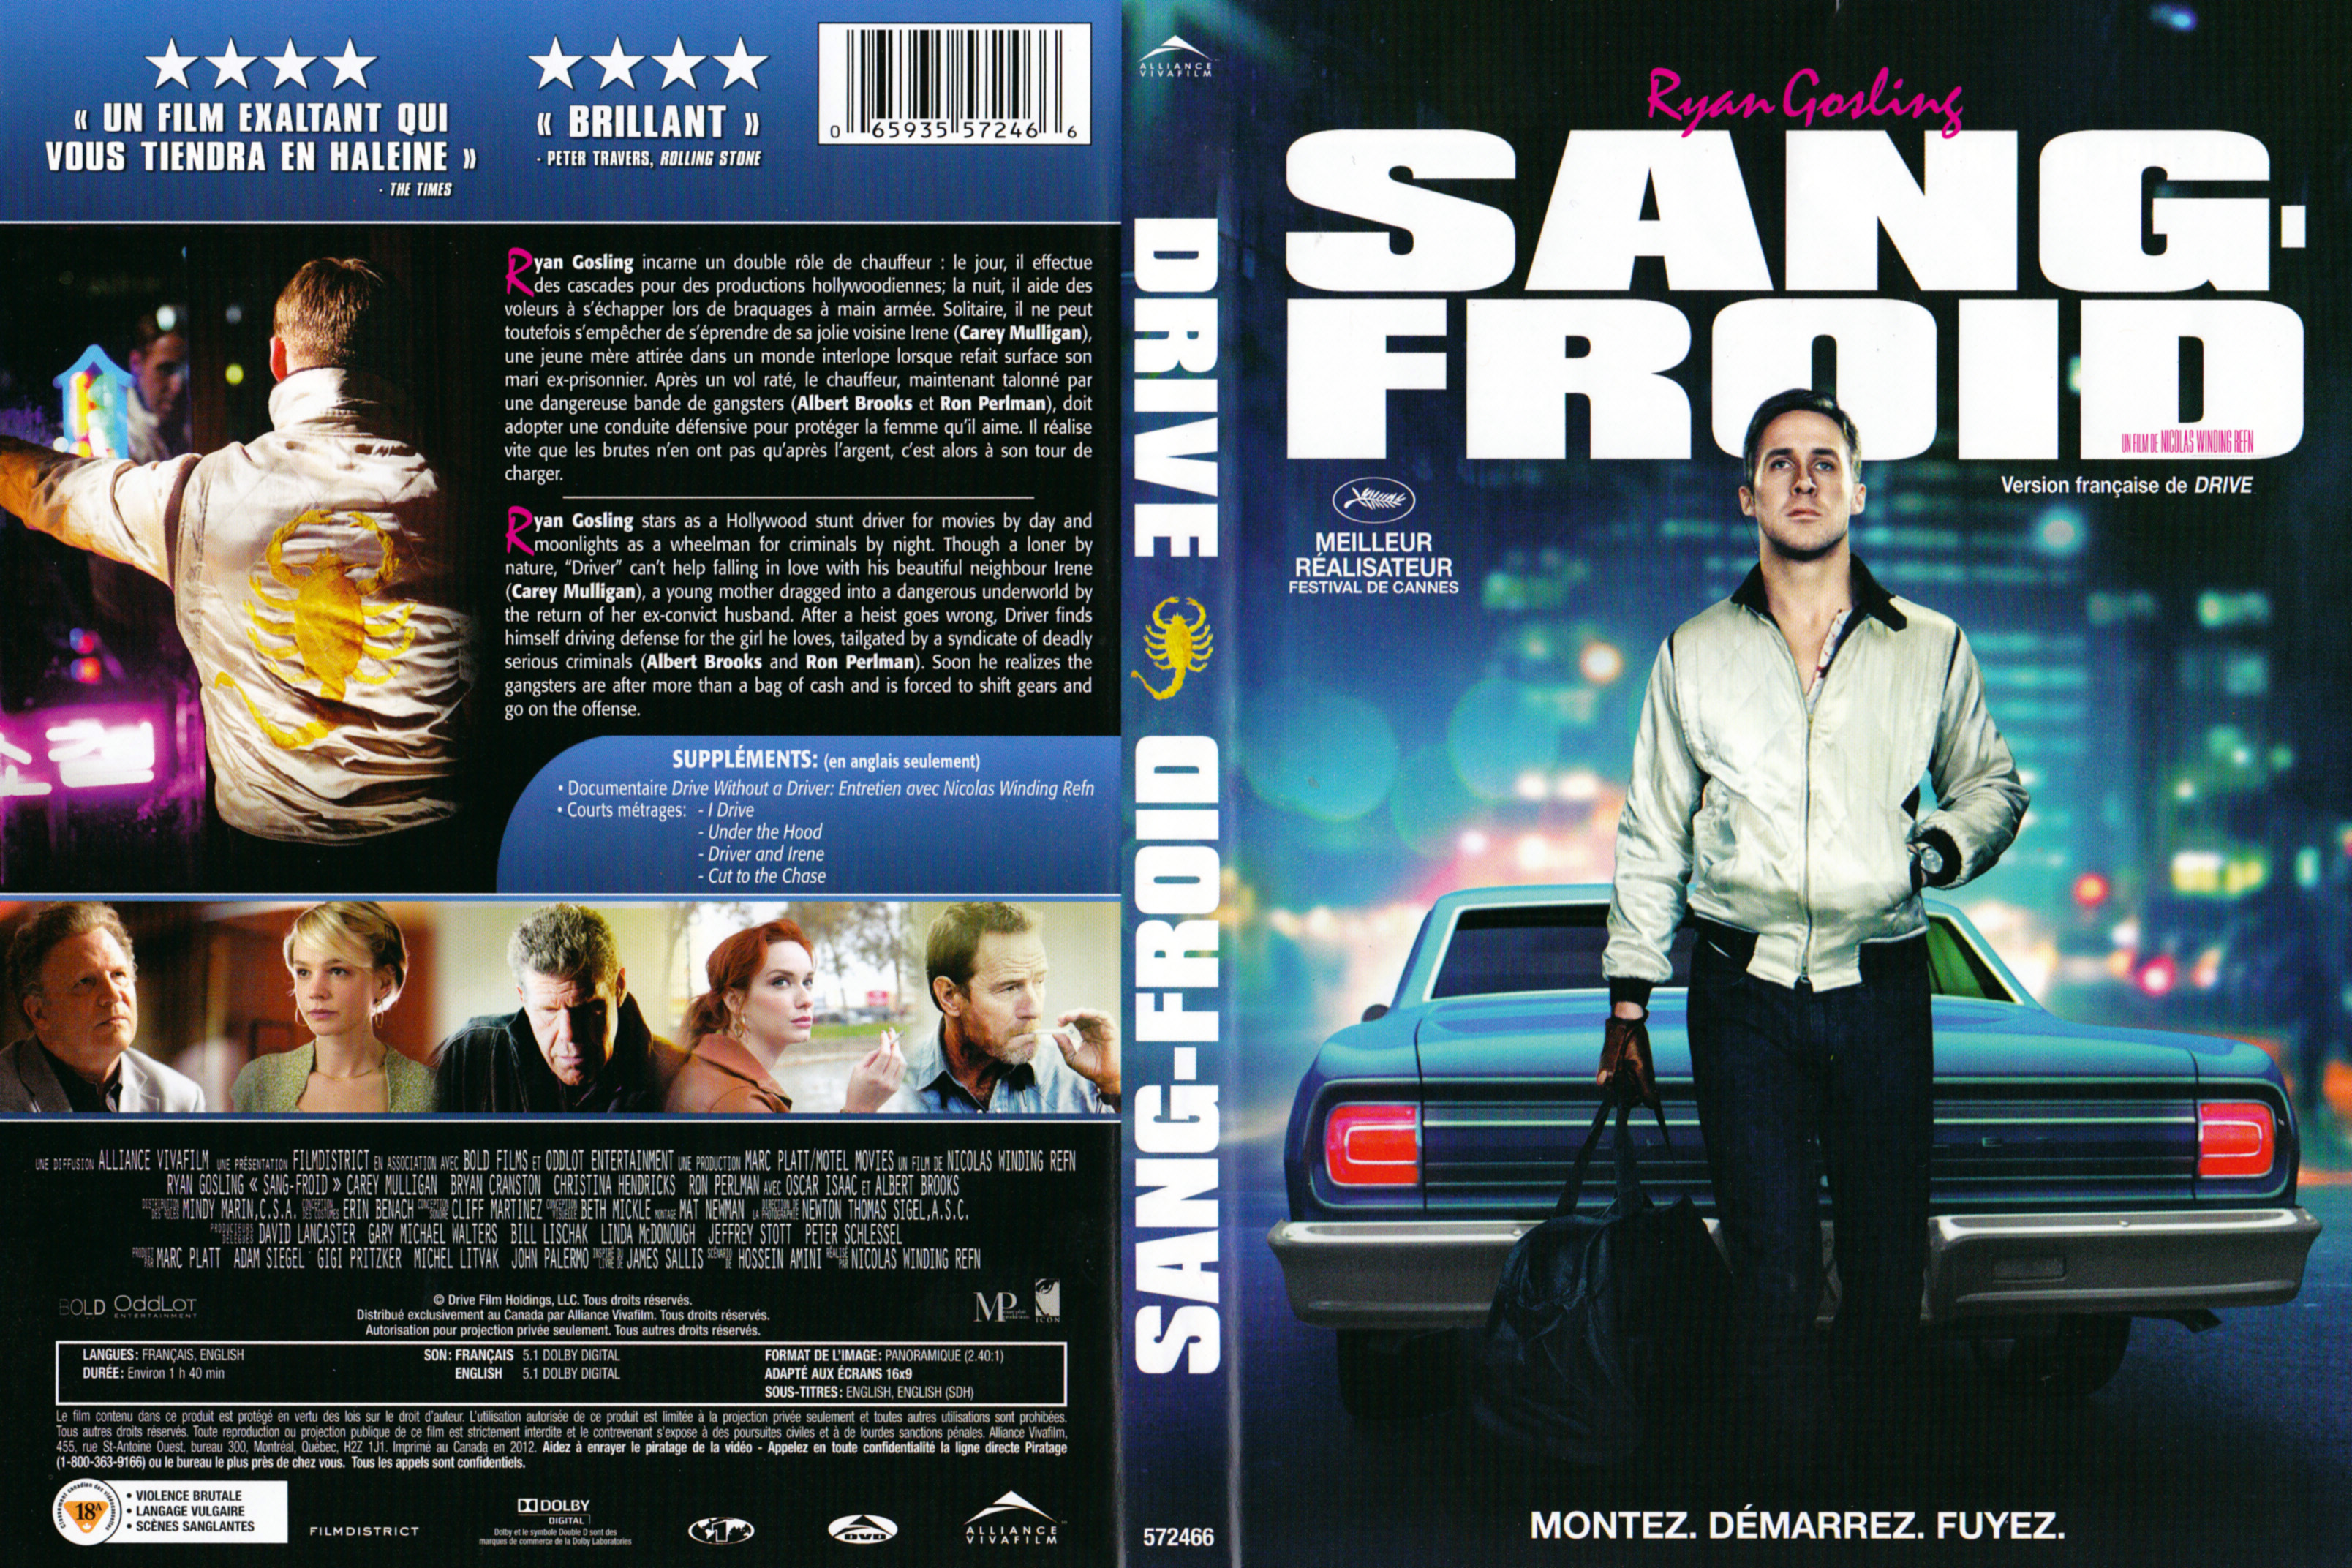 Jaquette DVD Sang Froid - Drive (2011) (Canadienne)